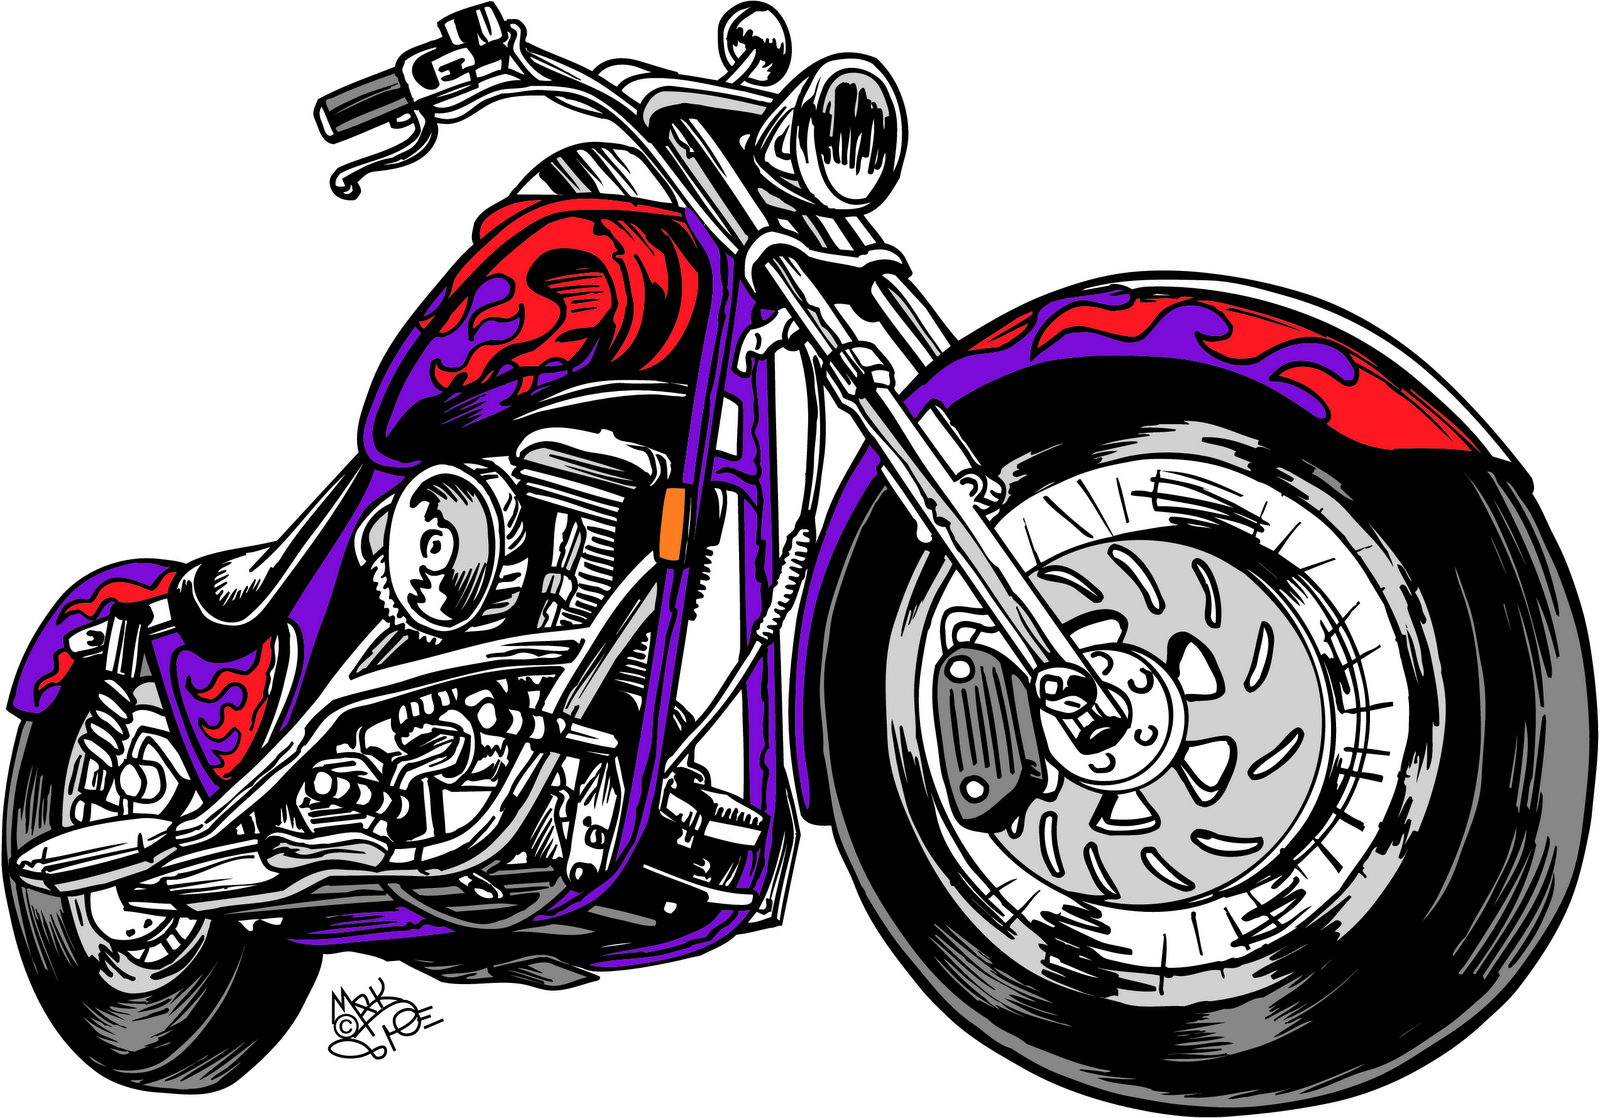 motorcycle clip art free .